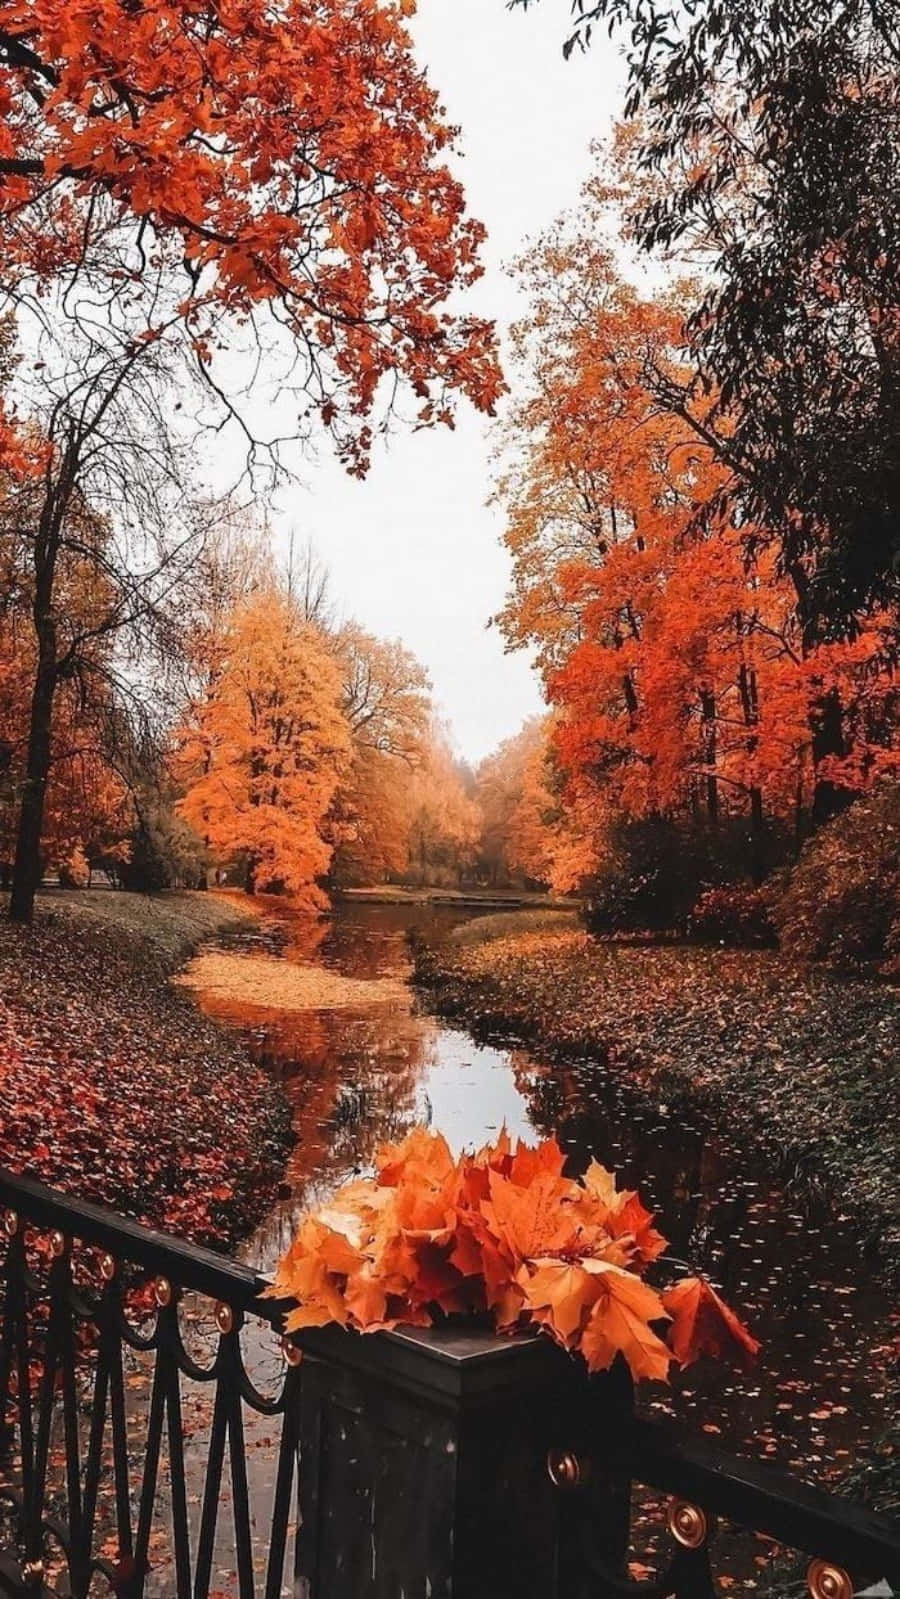 Enjoy a picturesque autumn in the countryside